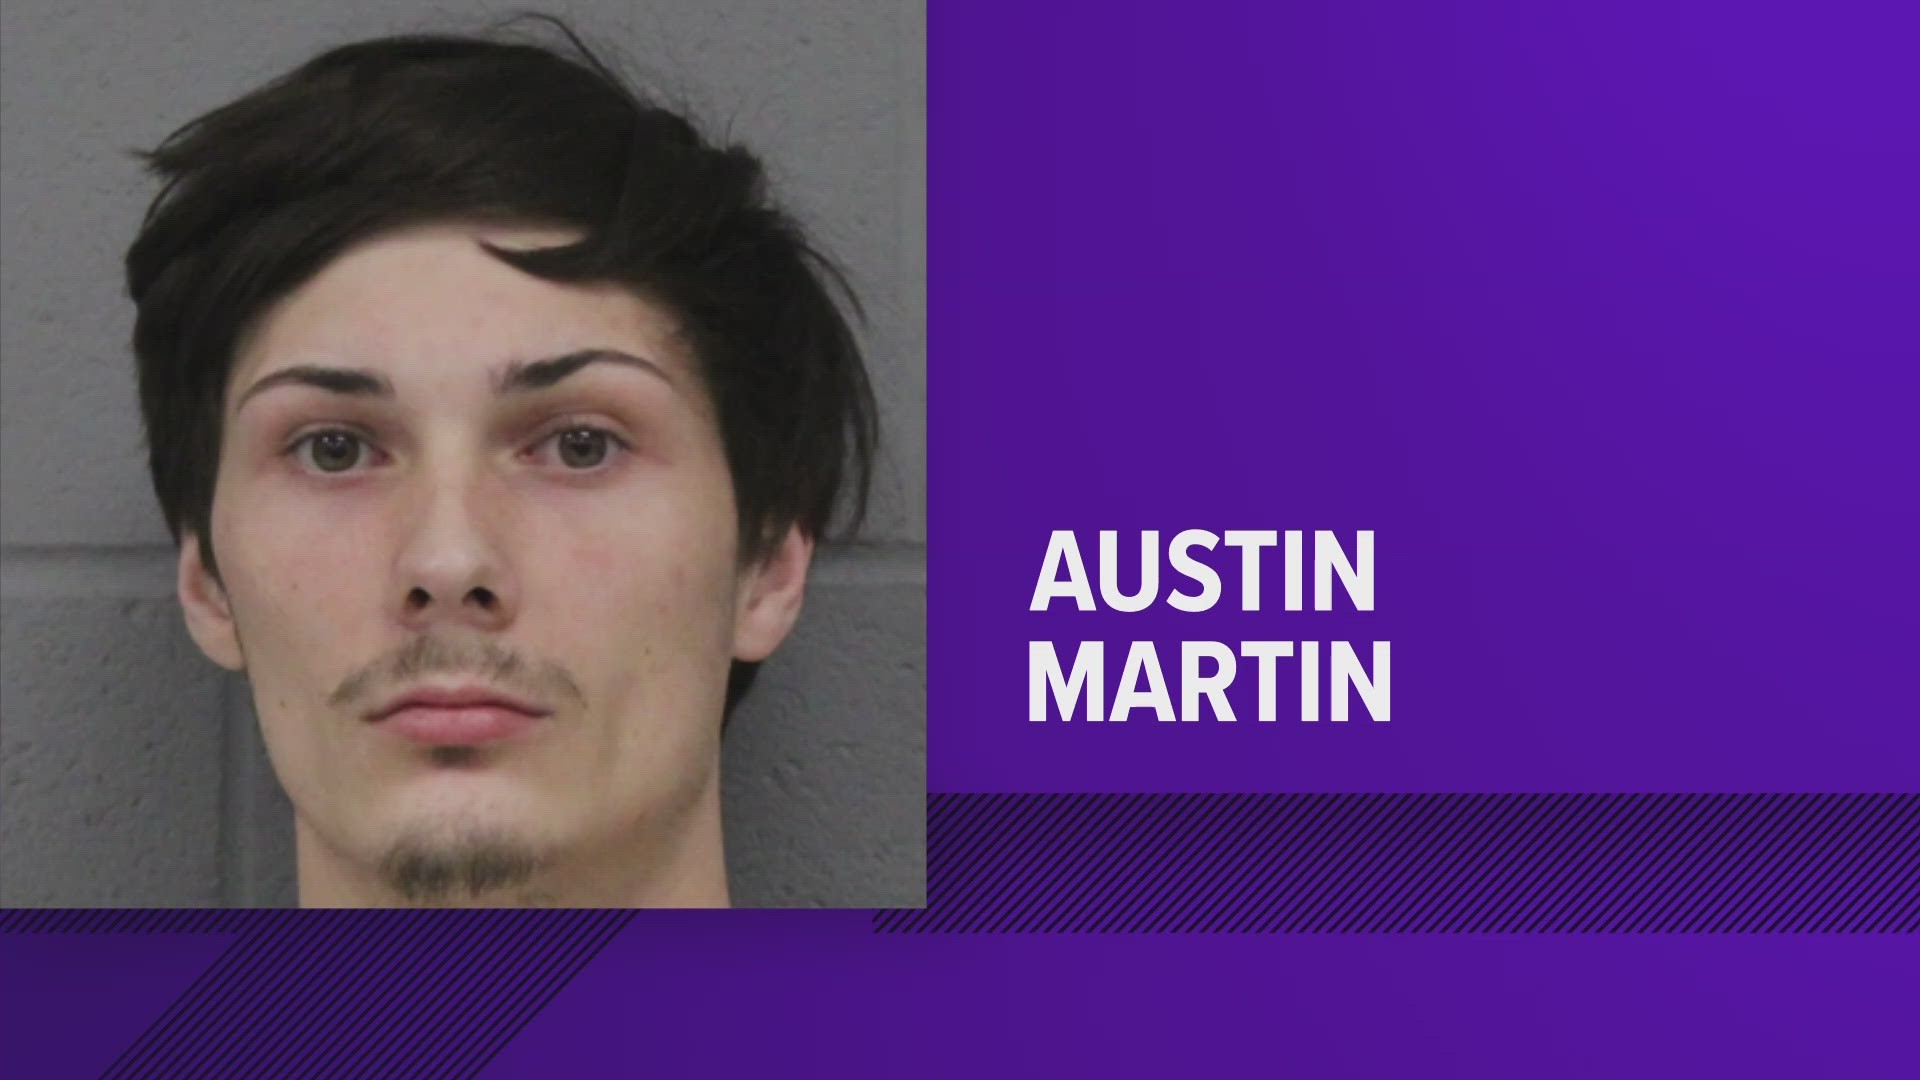 Austin Martin was charged with two counts of aggravated assault with a deadly weapon after a road rage incident in January.